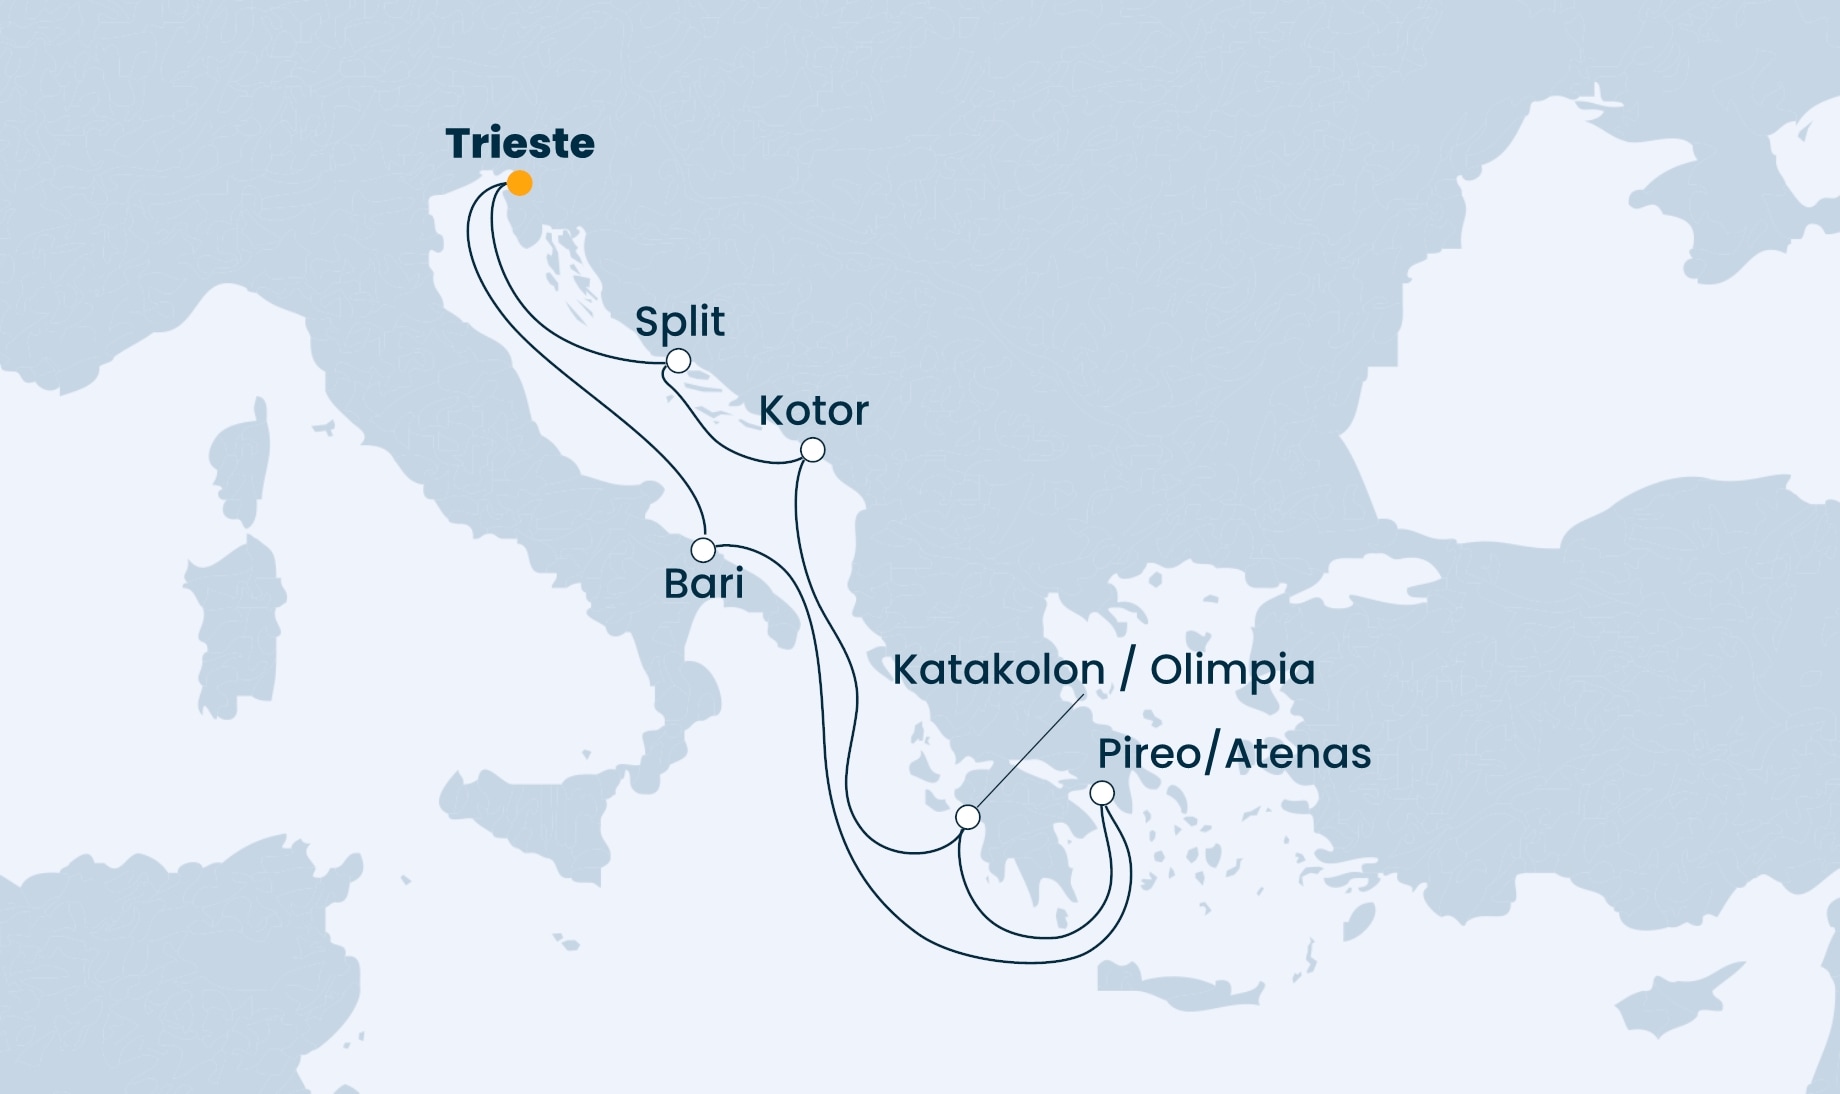 7 Night Adriatic Cruise On Costa Deliziosa Departing From Trieste itinerary map